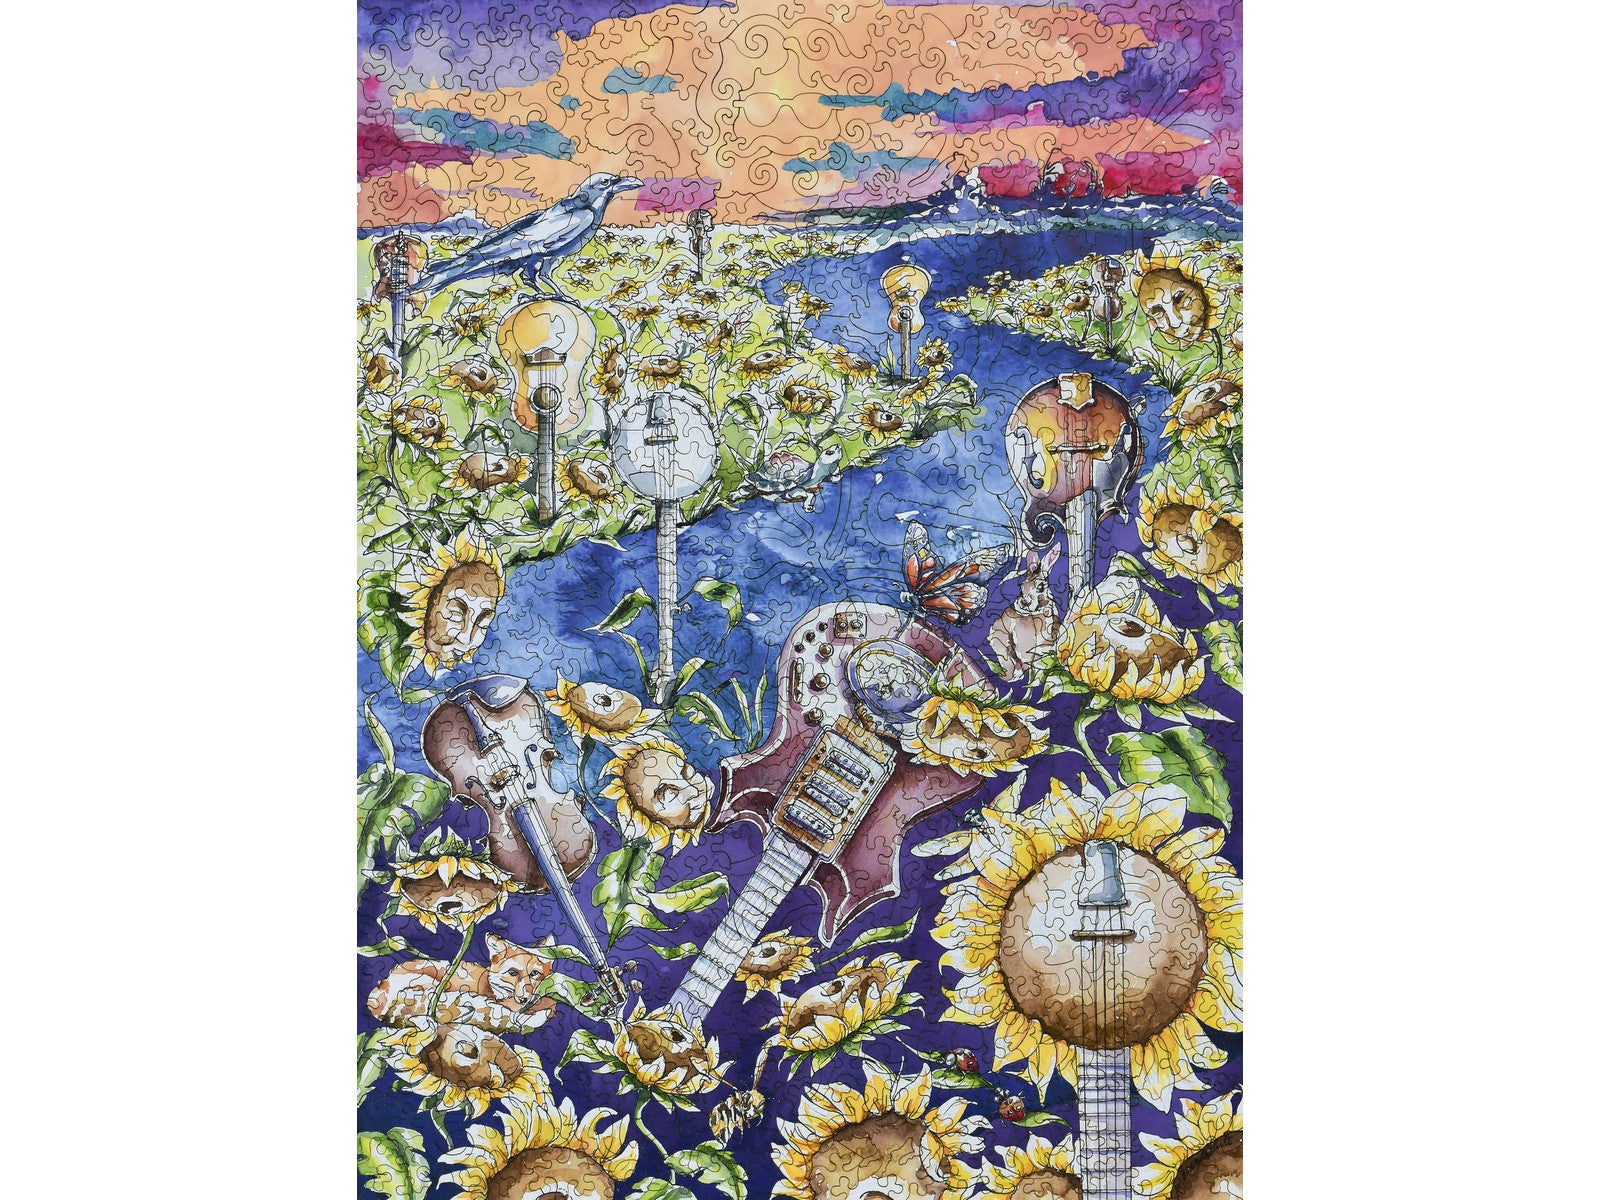 The front of the puzzle, Channeling Jerry, that has instruments growing out of the ground with sunflowers.